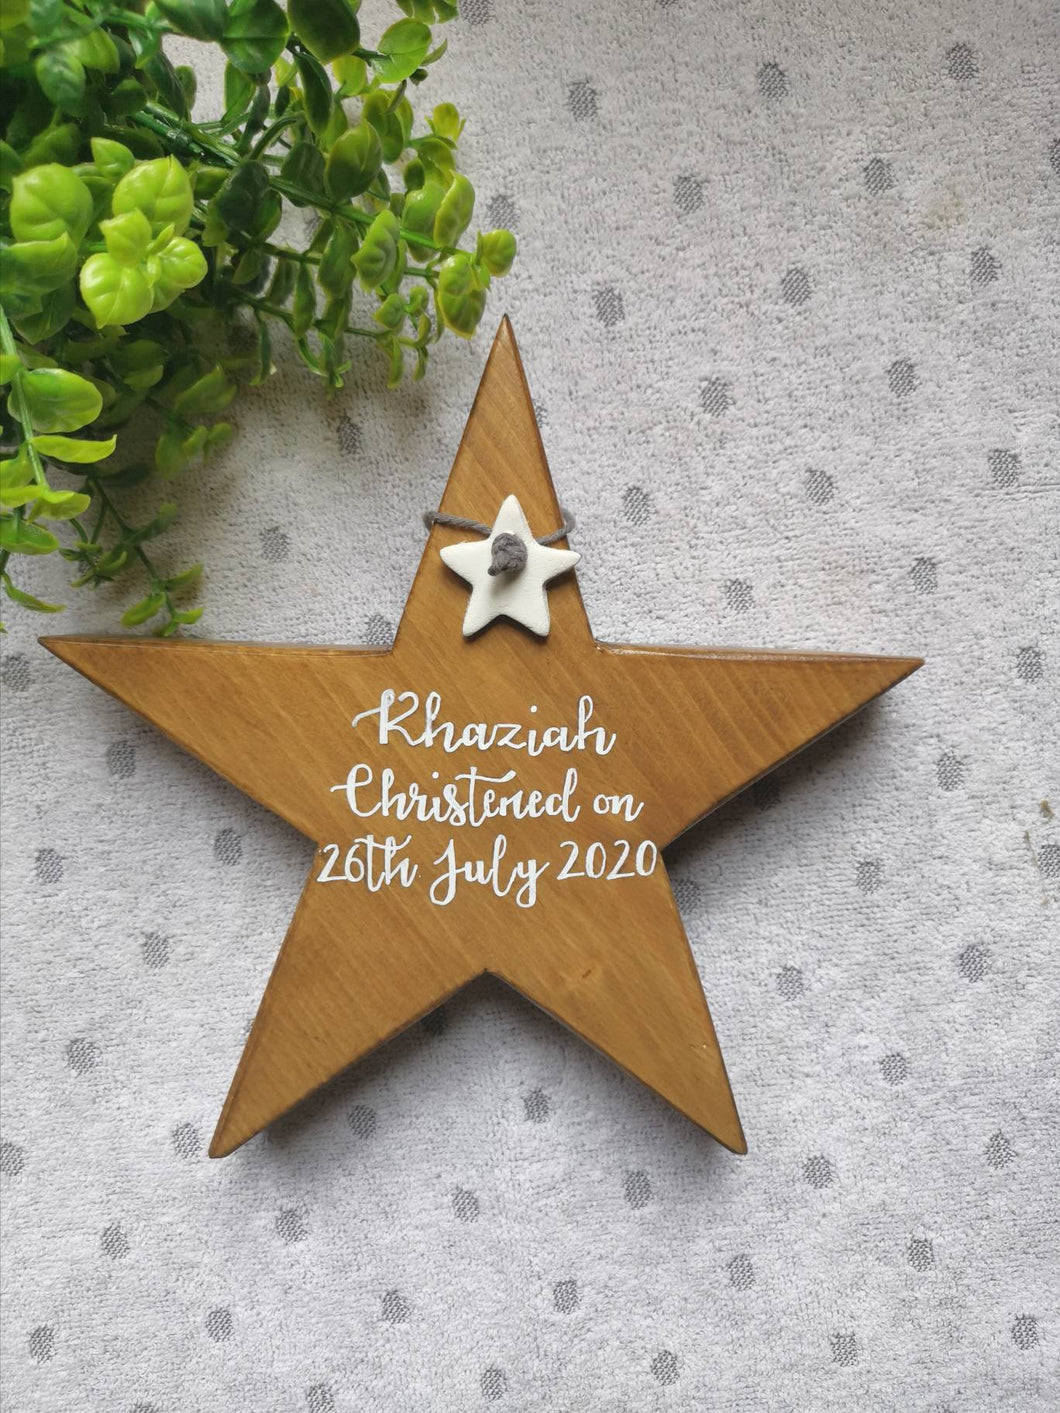 Freestanding Wooden Star, personalised gifts, Home Decor, interior accents, chunky star decor